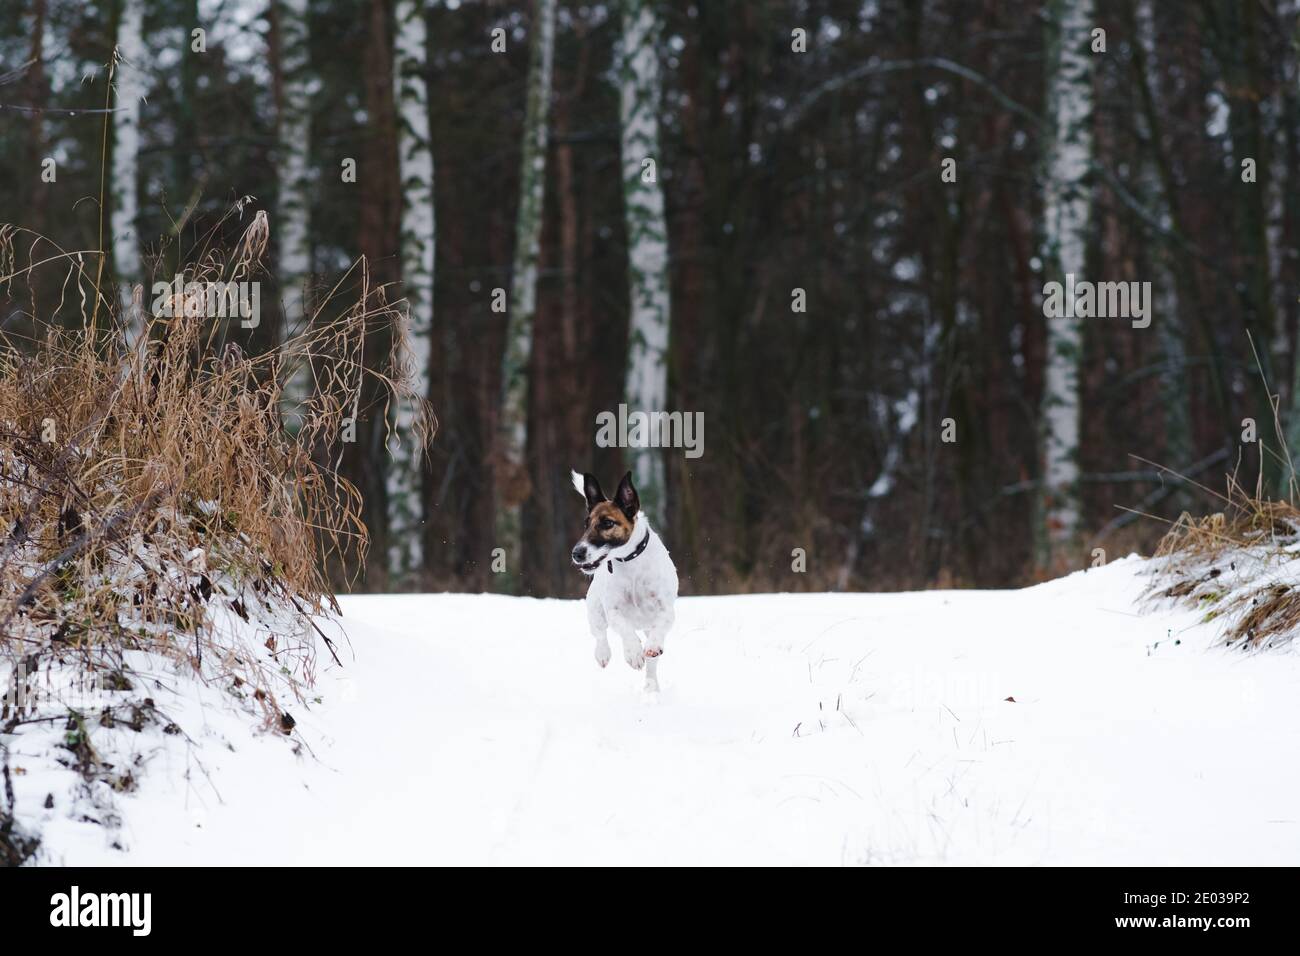 Funny fox terrier dog runs in the snowy forest. Walking with dogs in winter, cold season active lifestyle with pets Stock Photo